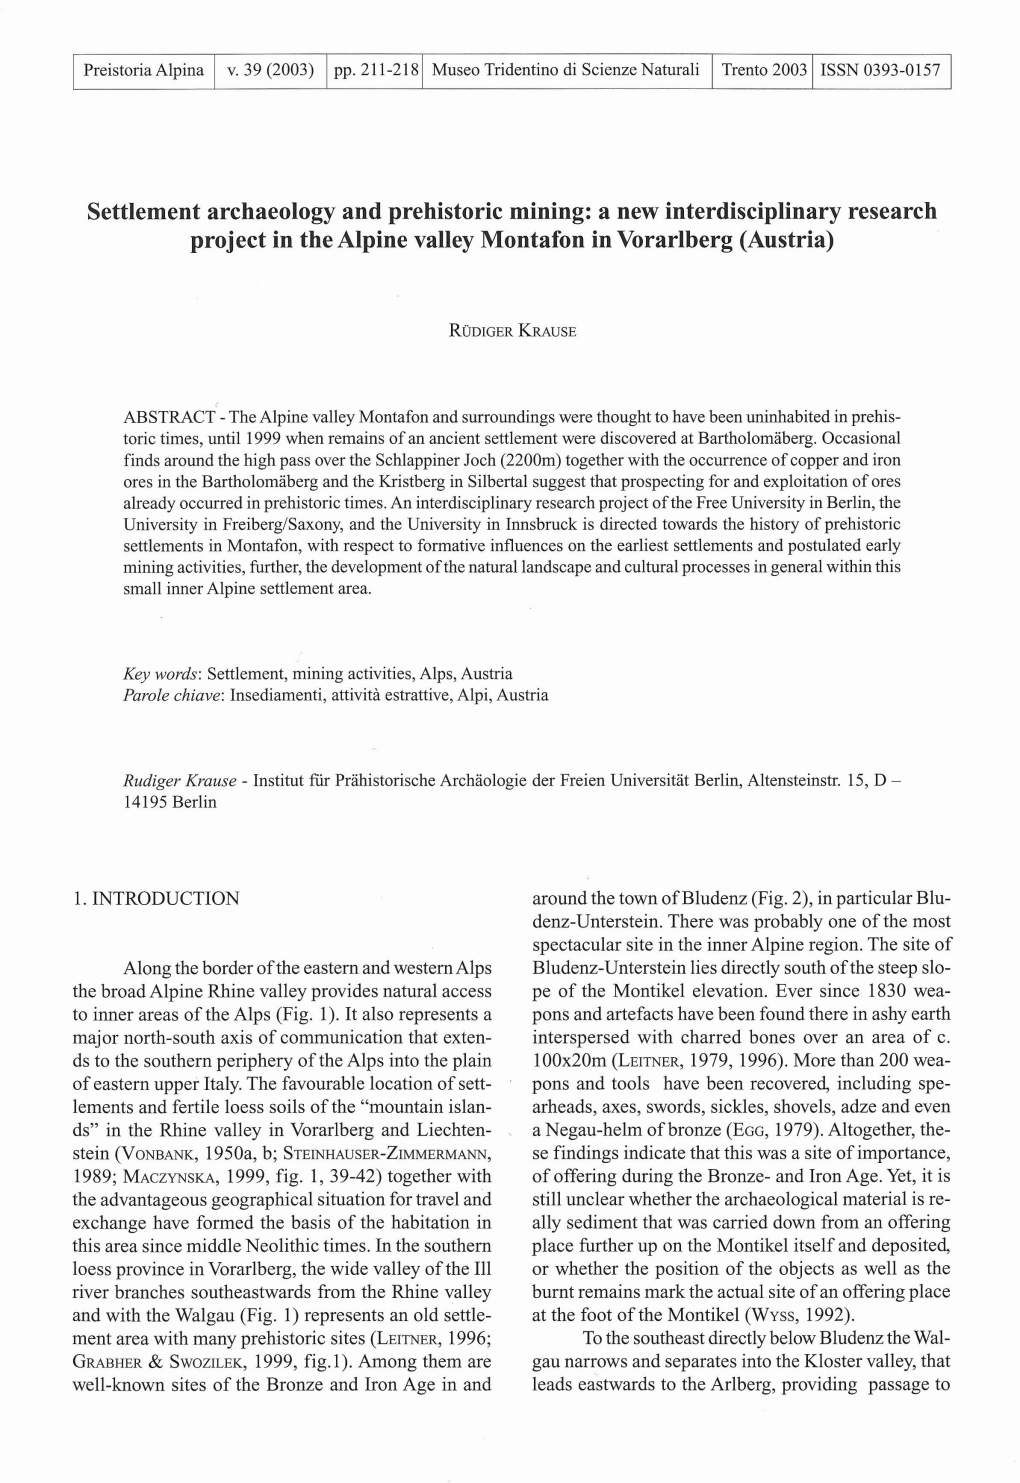 Settlement Archaeology and Prehistoric Mining: a New Interdisciplinary Research Project in the Alpine Valley Montafon in Vorarlberg (Austria)